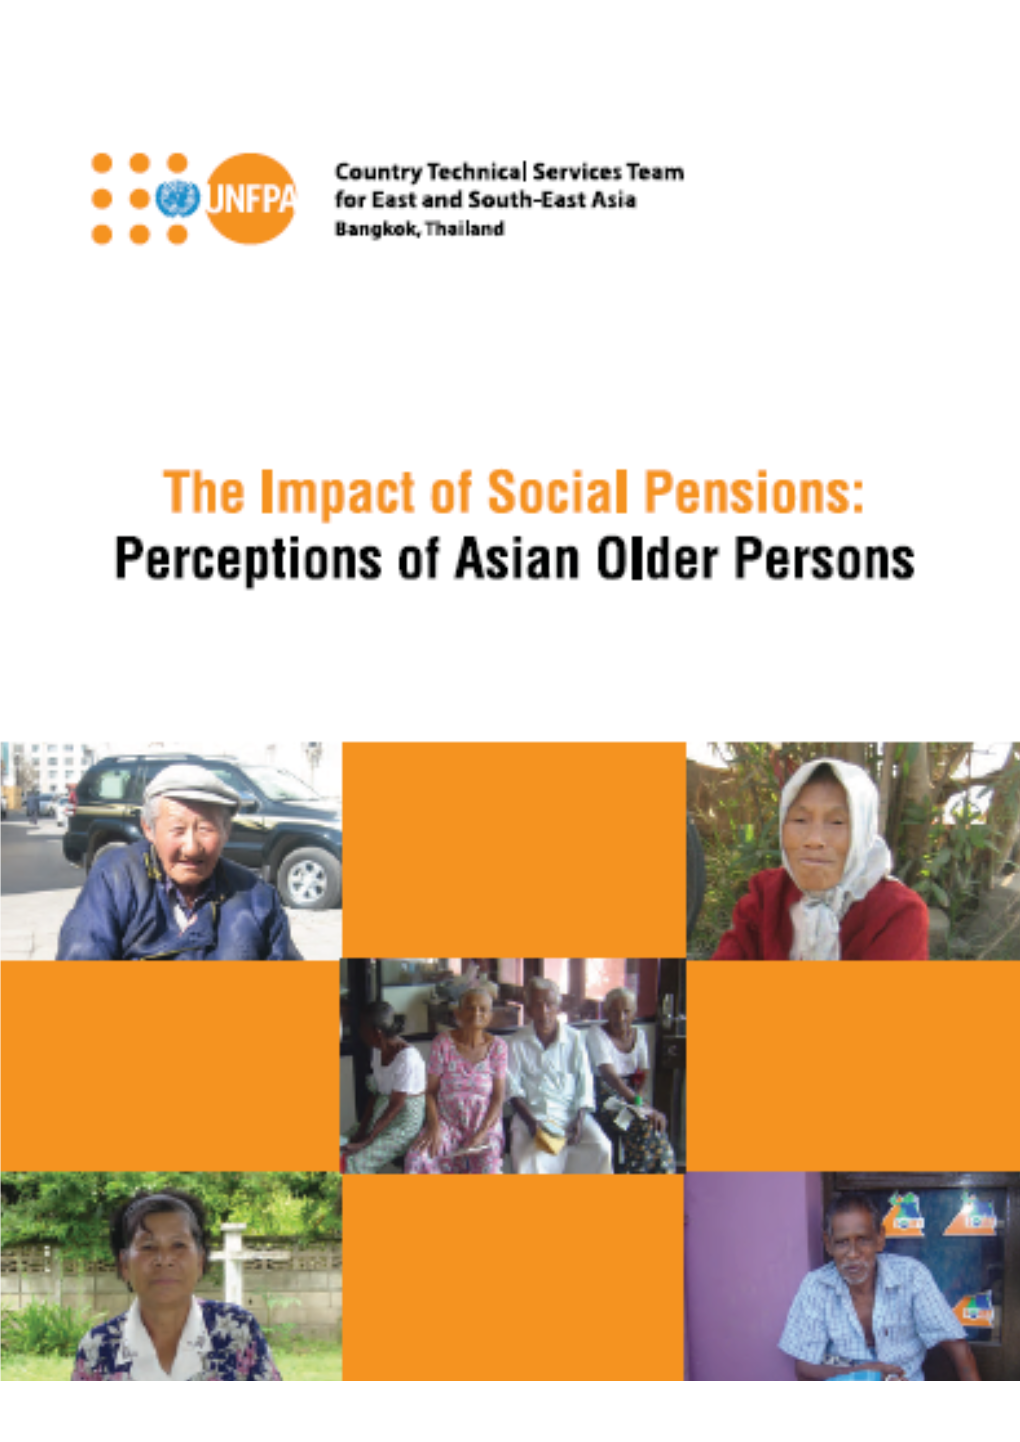 The Impact of Social Pensions by Eliciting the Opinion of Older Persons, Key Informants and Relevant Government Officials